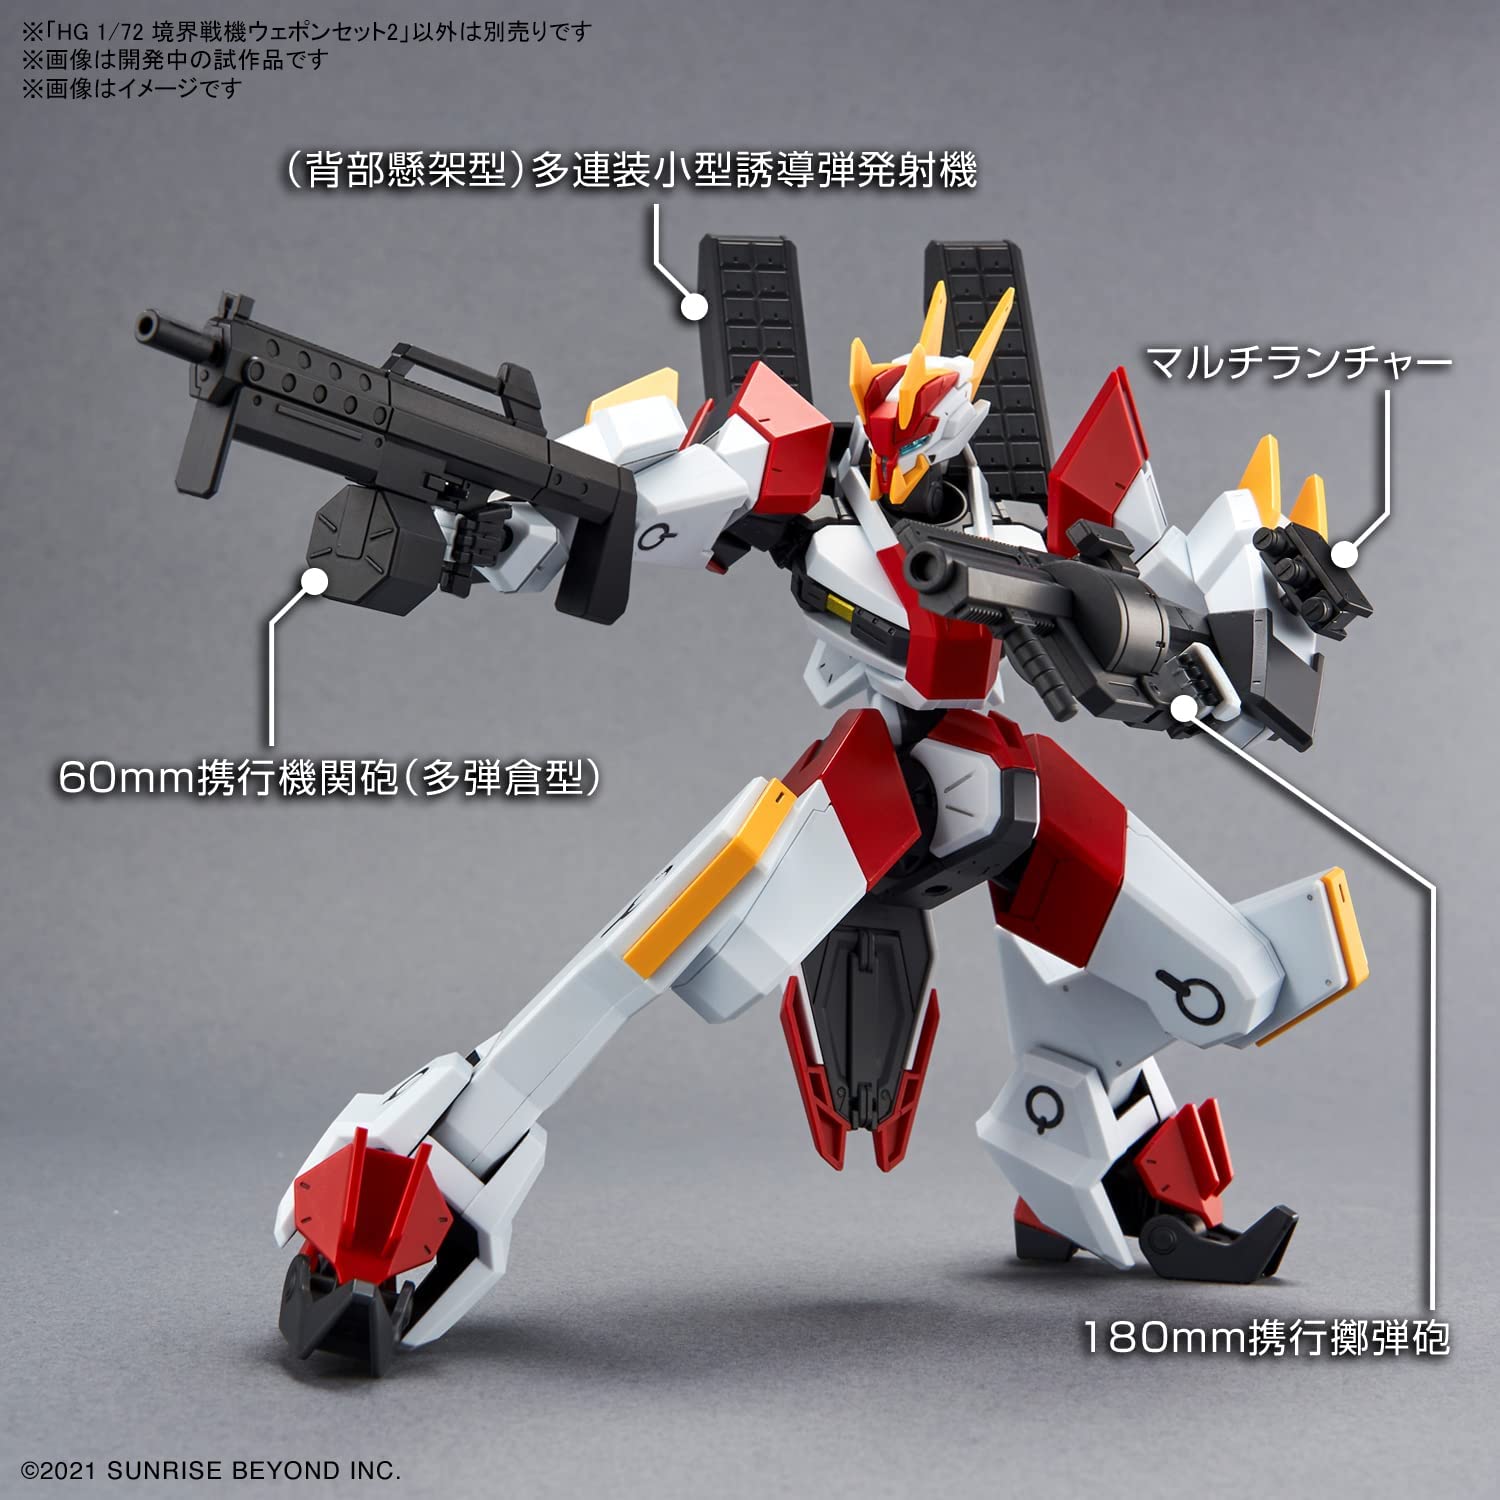 HG Boundary Battlers Weapon Set 2 1/72 Scale